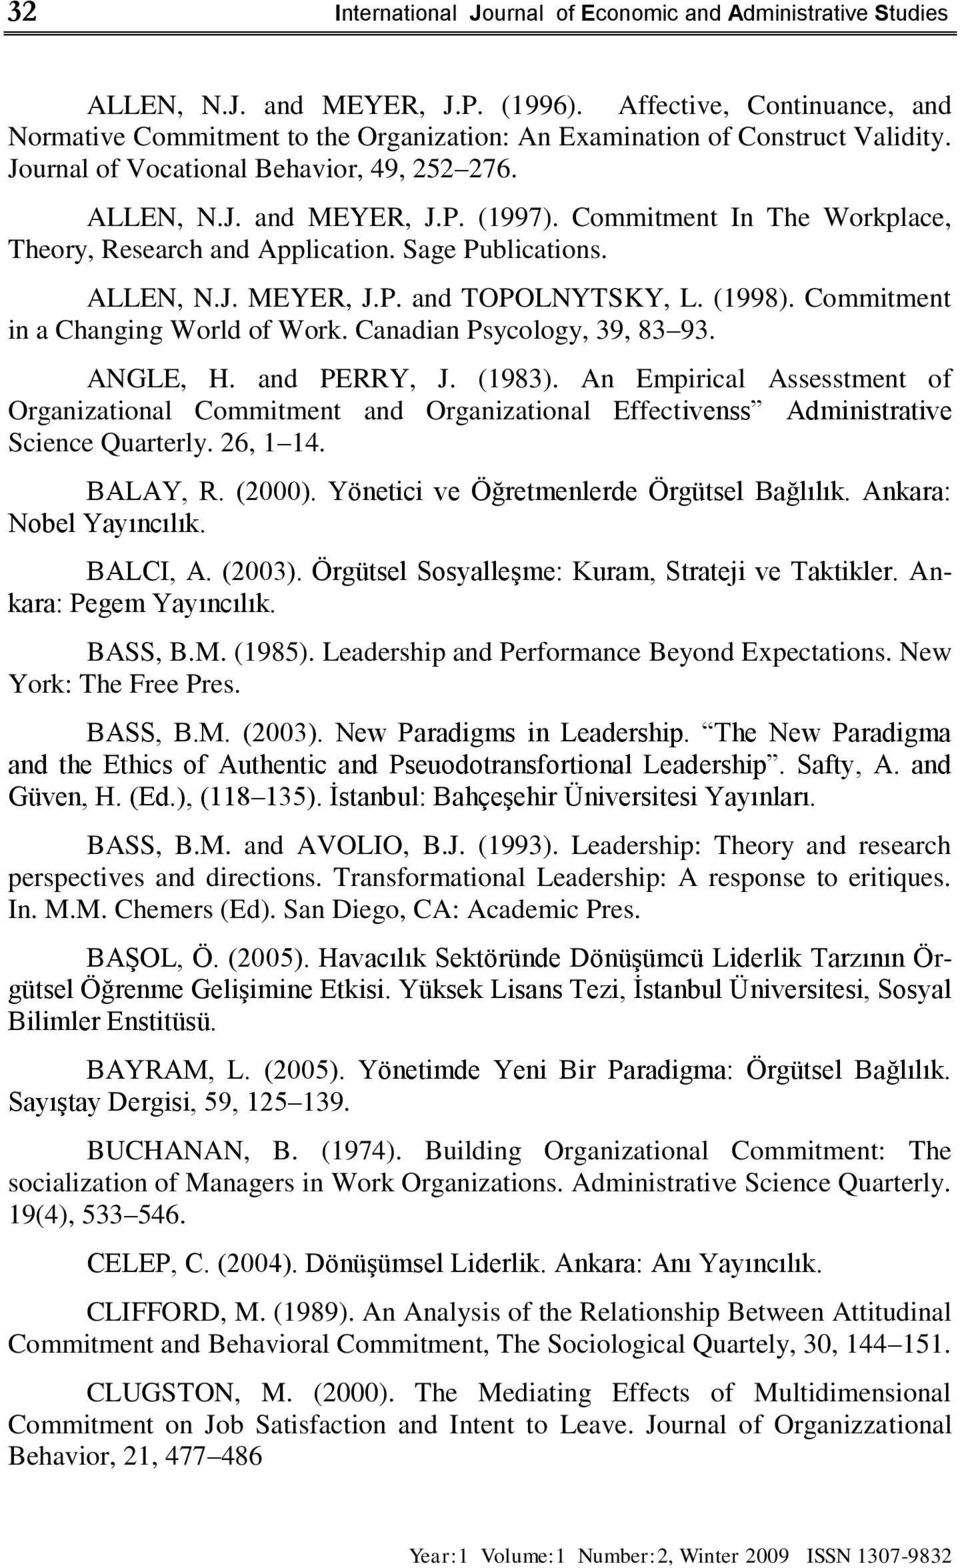 Commitment In The Workplace, Theory, Research and Application. Sage Publications. ALLEN, N.J. MEYER, J.P. and TOPOLNYTSKY, L. (1998). Commitment in a Changing World of Work.